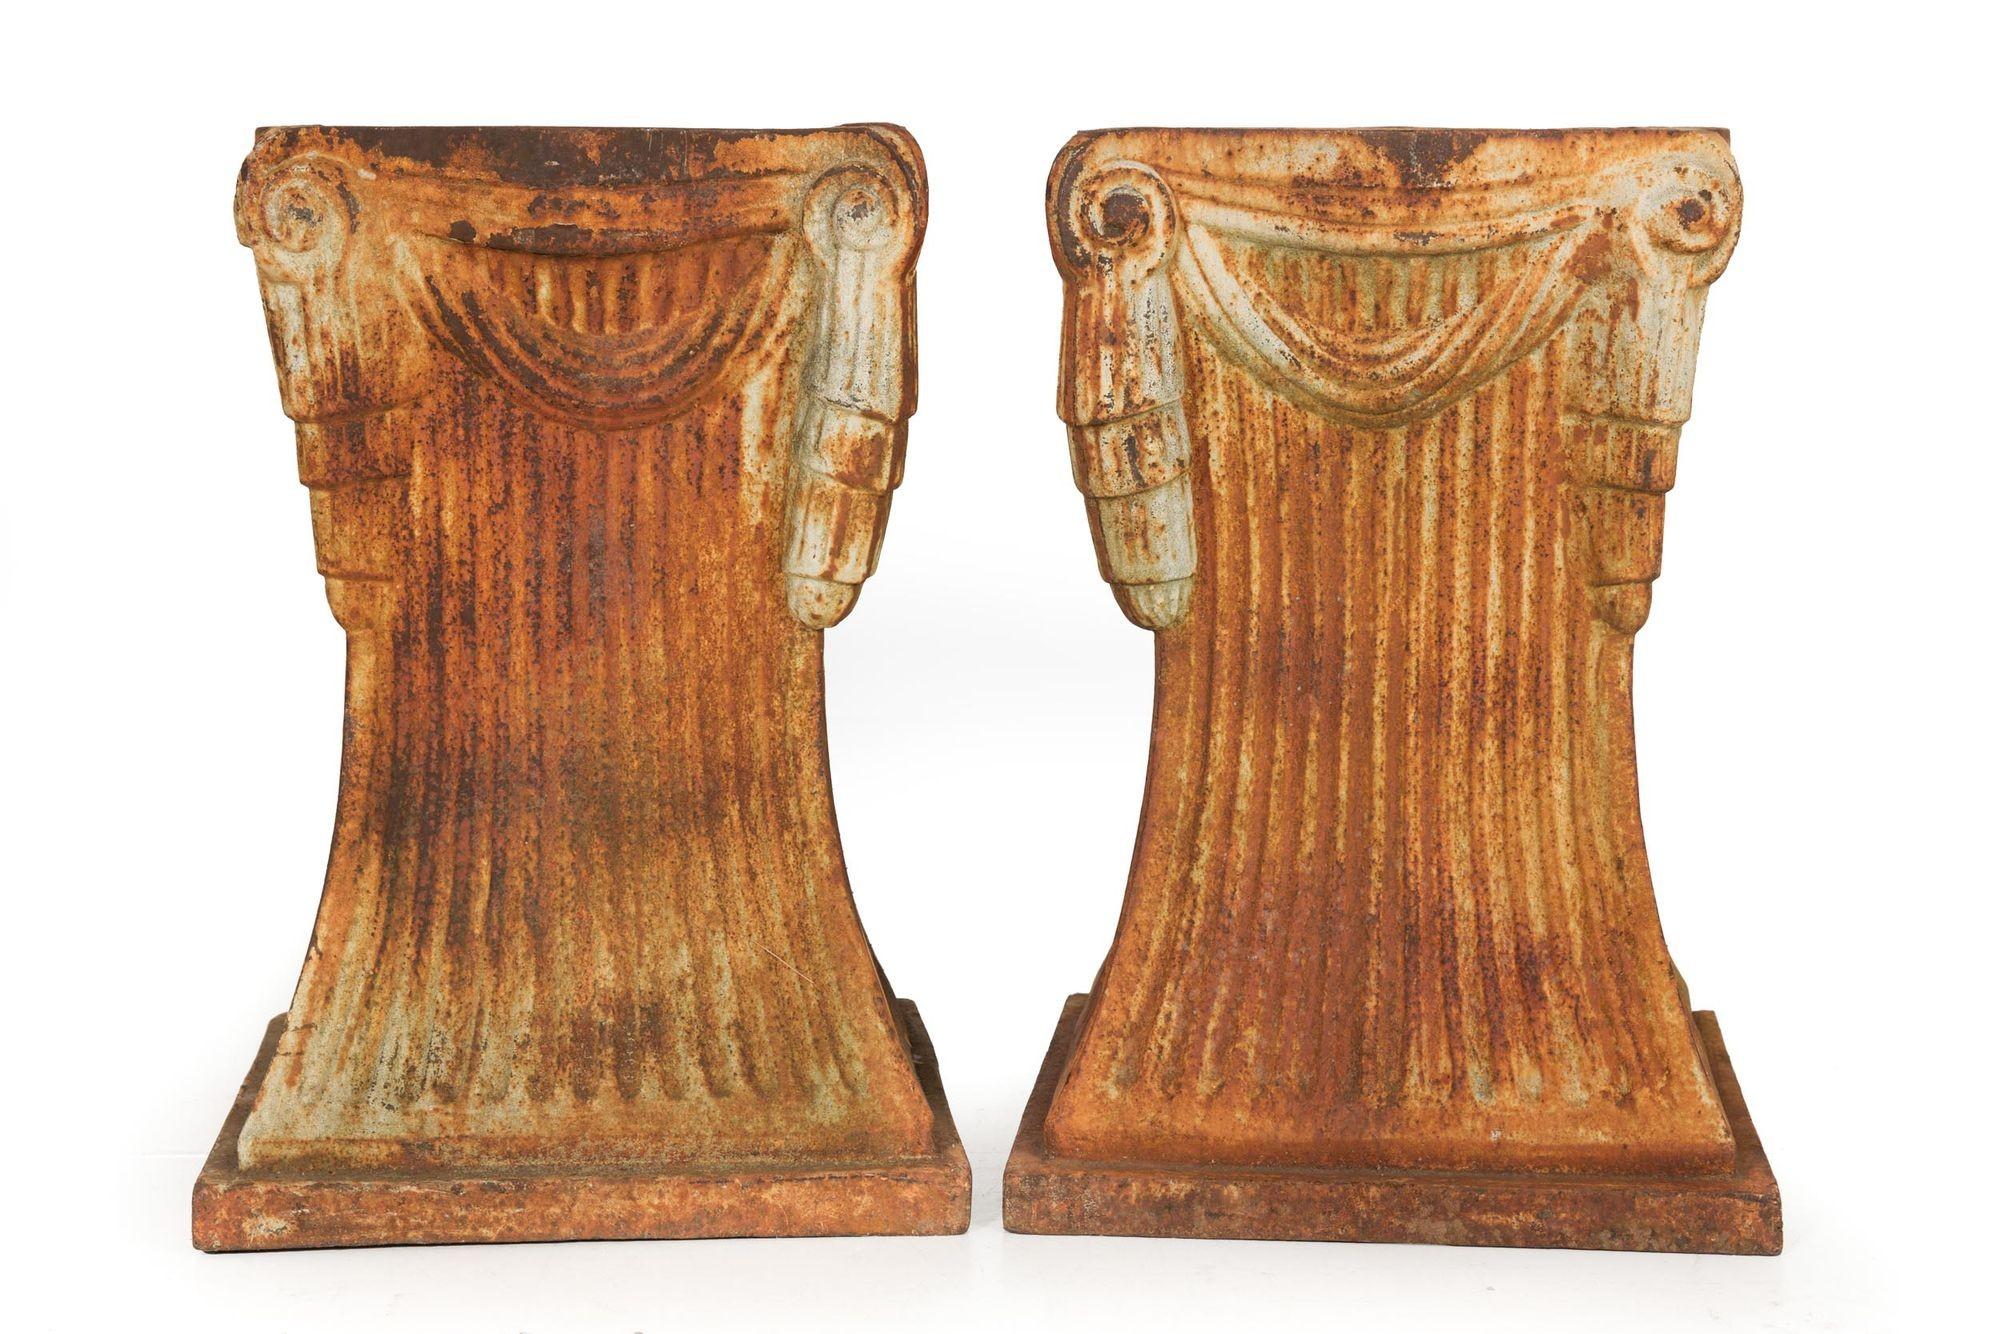 20th Century Unusual Pair of Art Deco Cast-Iron Garden Pedestals for Statuary or Planters For Sale